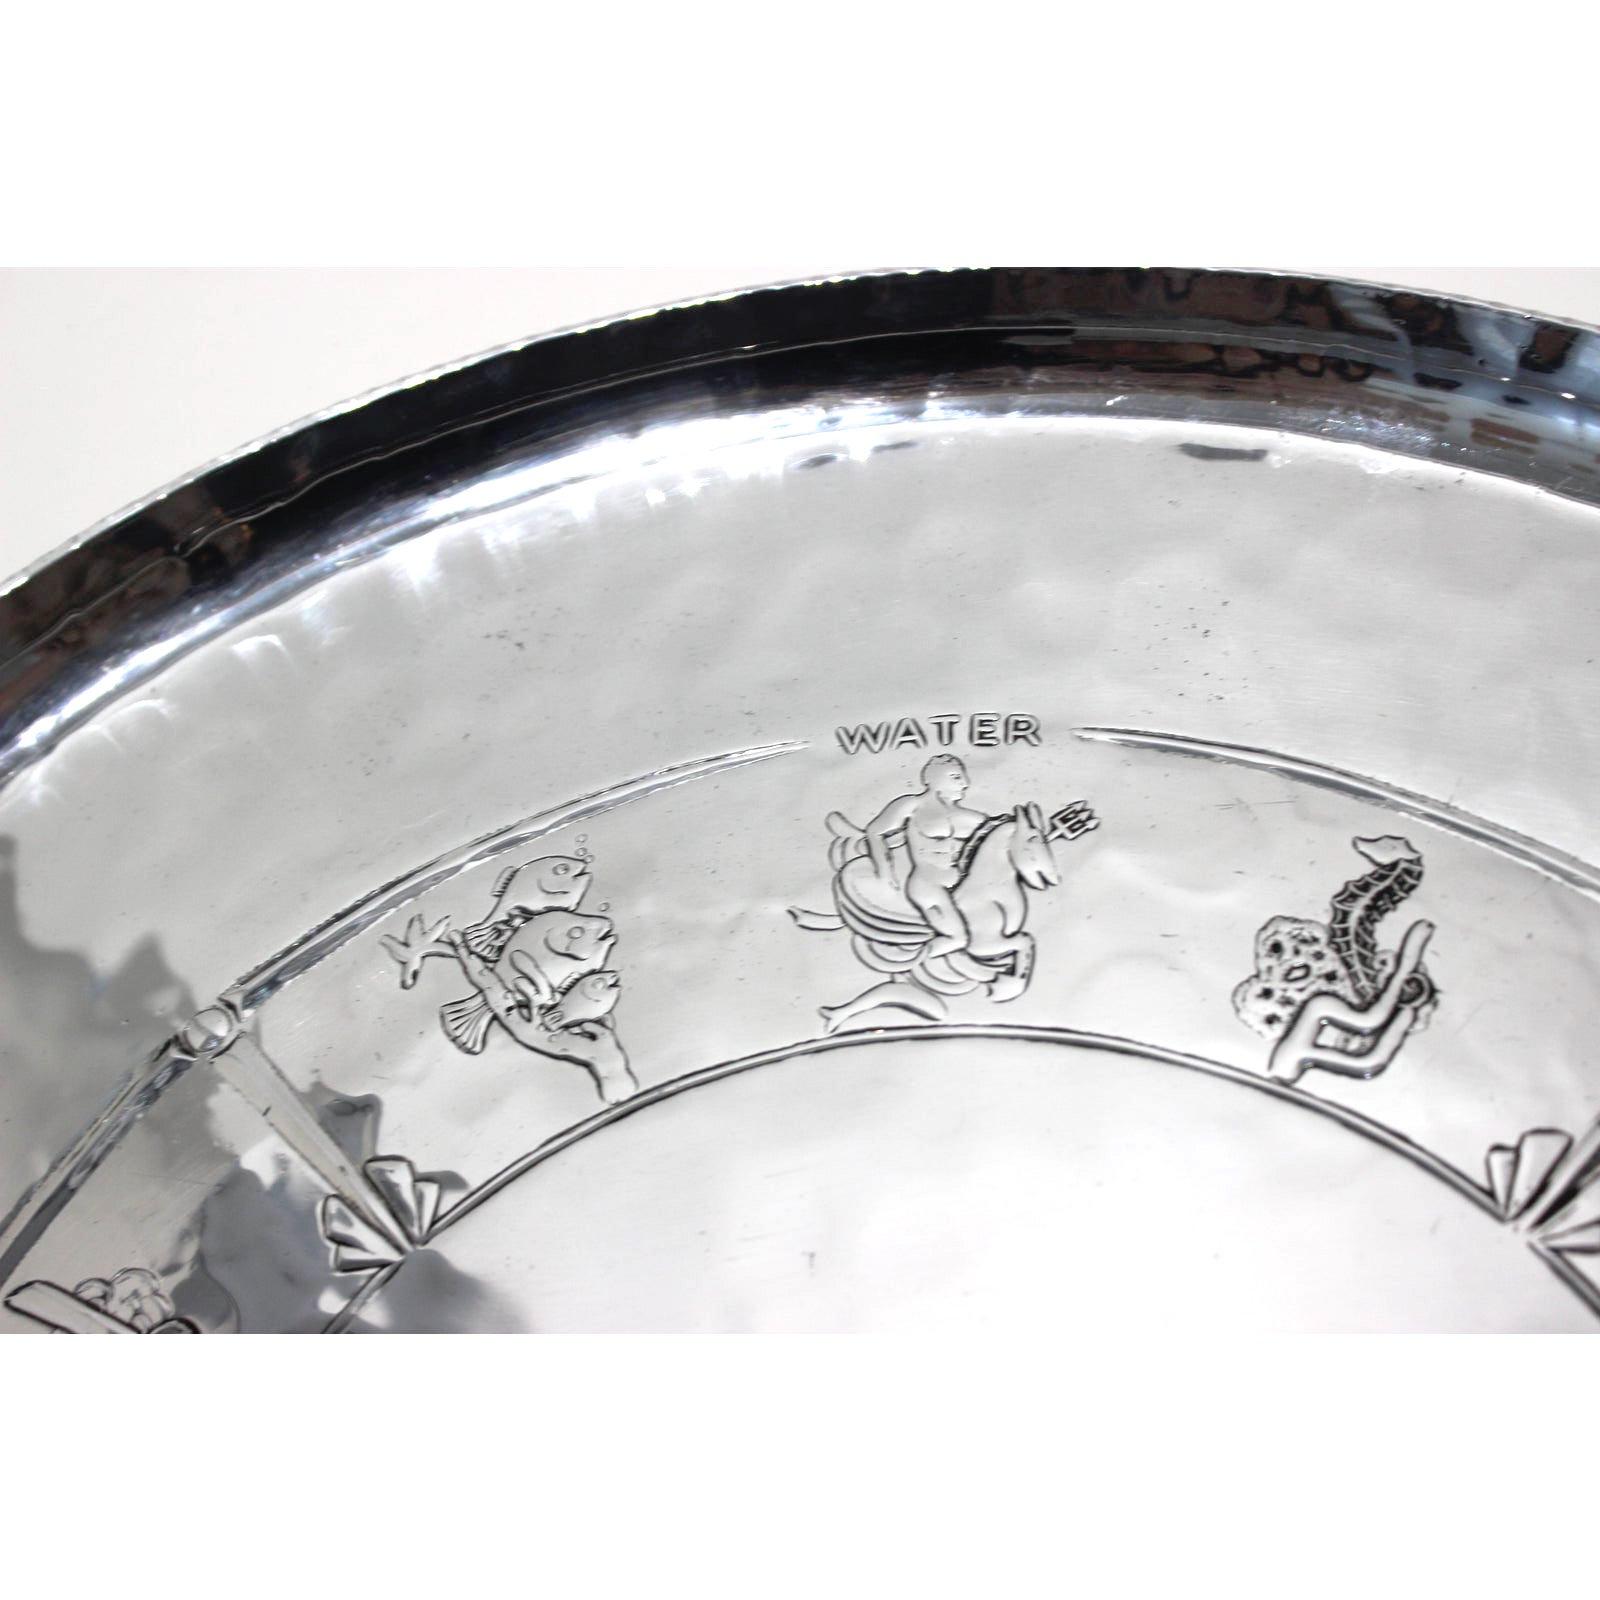 Hand-Crafted American Art Deco Aluminum Serving Tray by Everlast Metal